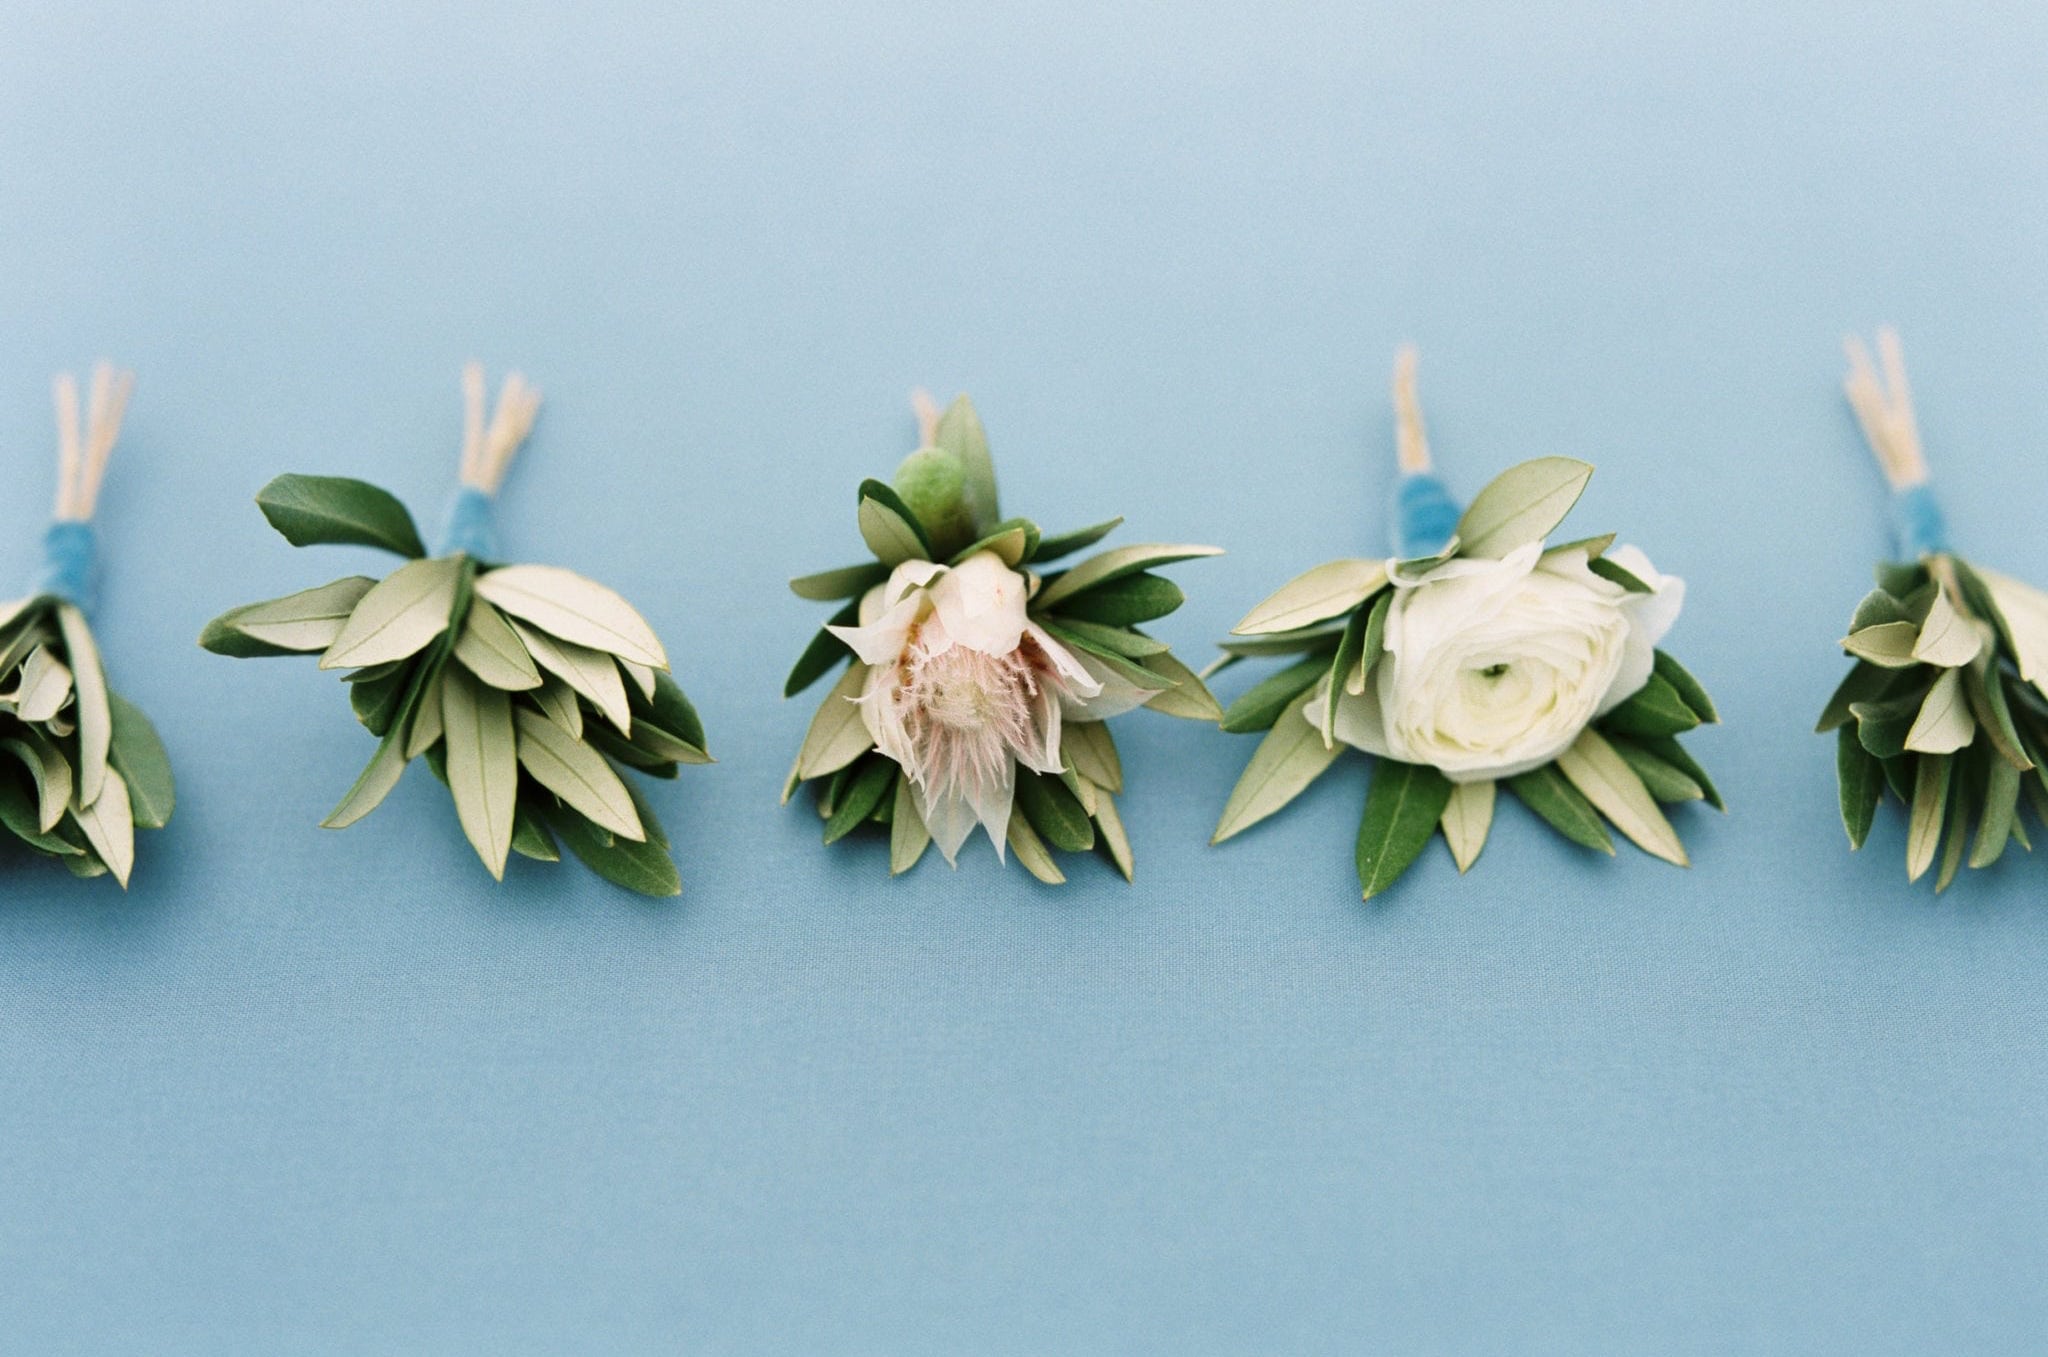 simple variety of tasteful green and white boutonnieres for the groomsmen and ushers at mississippi gulf coast wedding by kim starr wise white ranunculus boutonniere